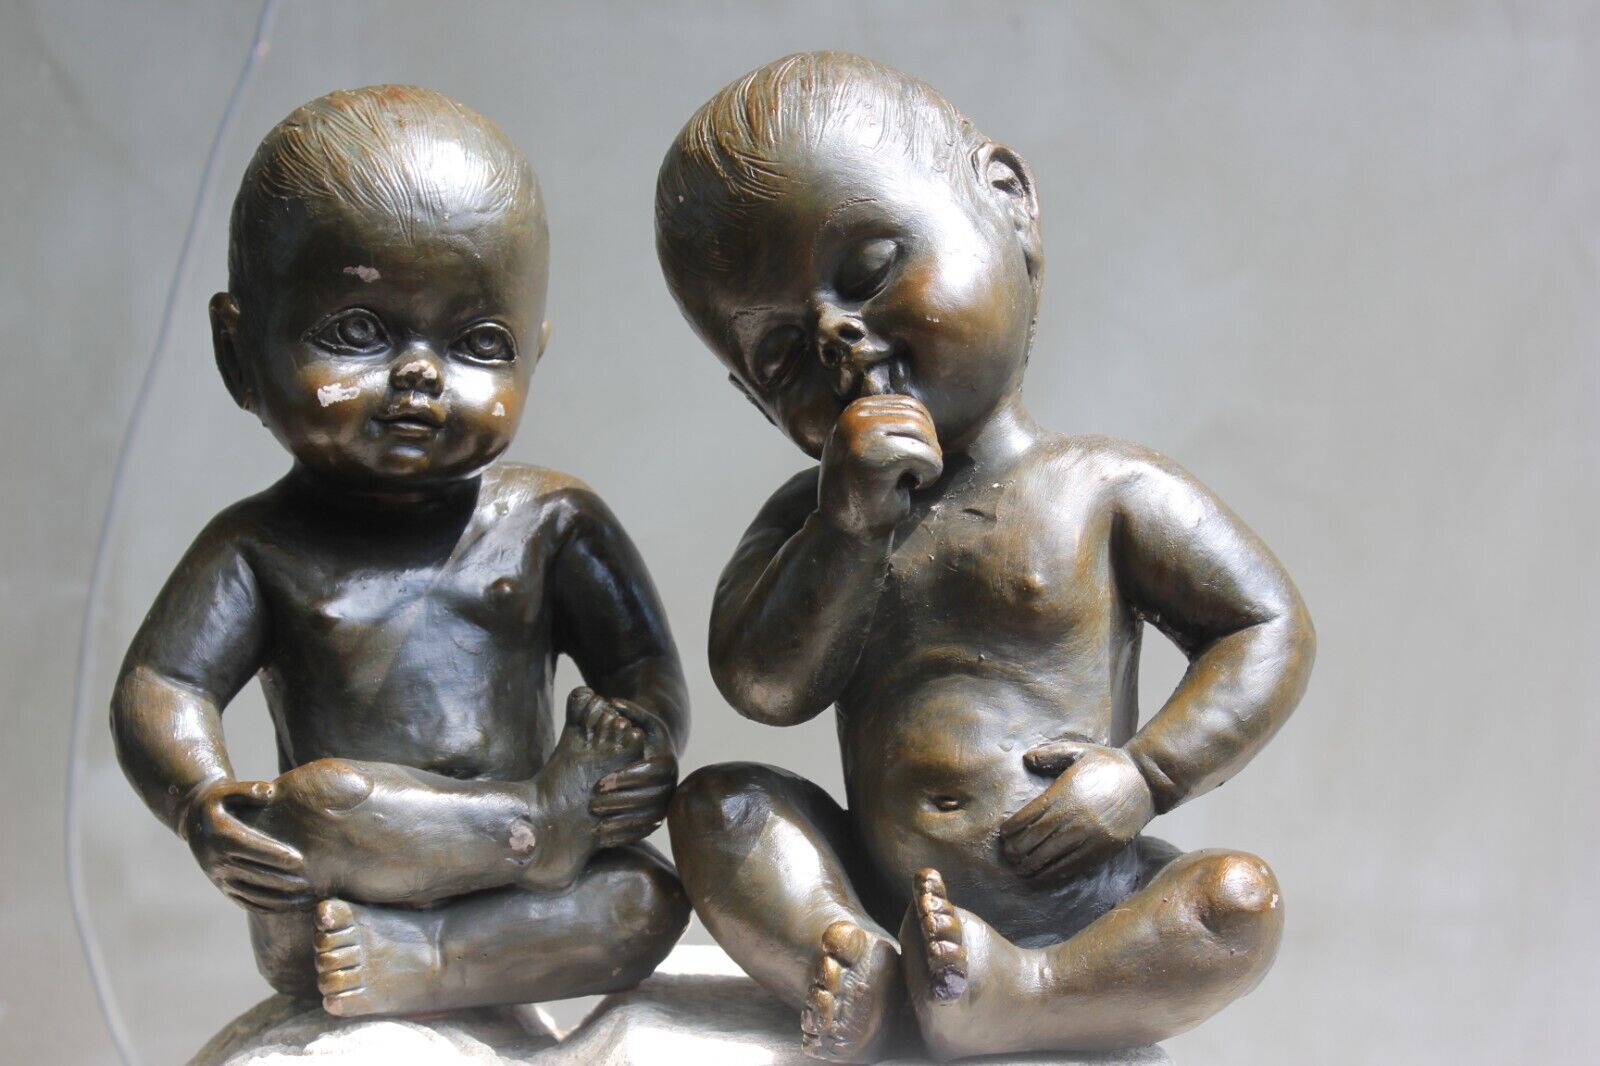 Two Large Babies Sculptures Signed Mat Wanders Couple Newborns Statues Bookends